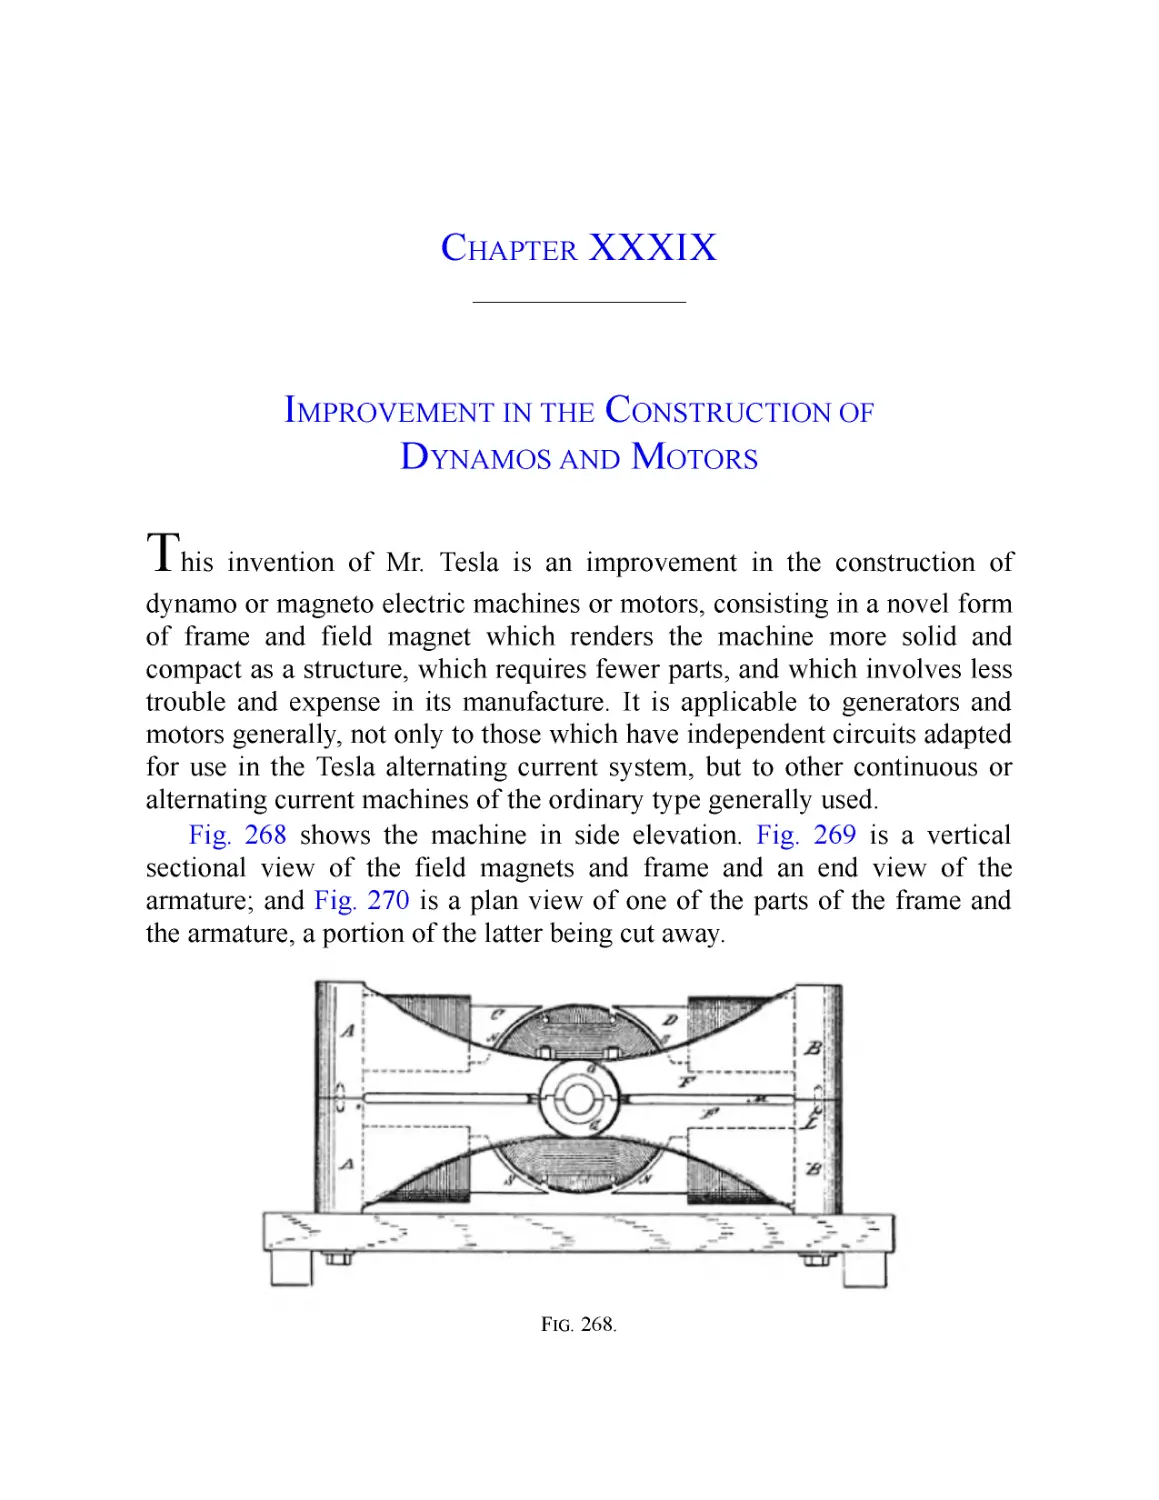 ﻿Chapter XXXIX: Improvement in the Construction of Dynamos and Moto